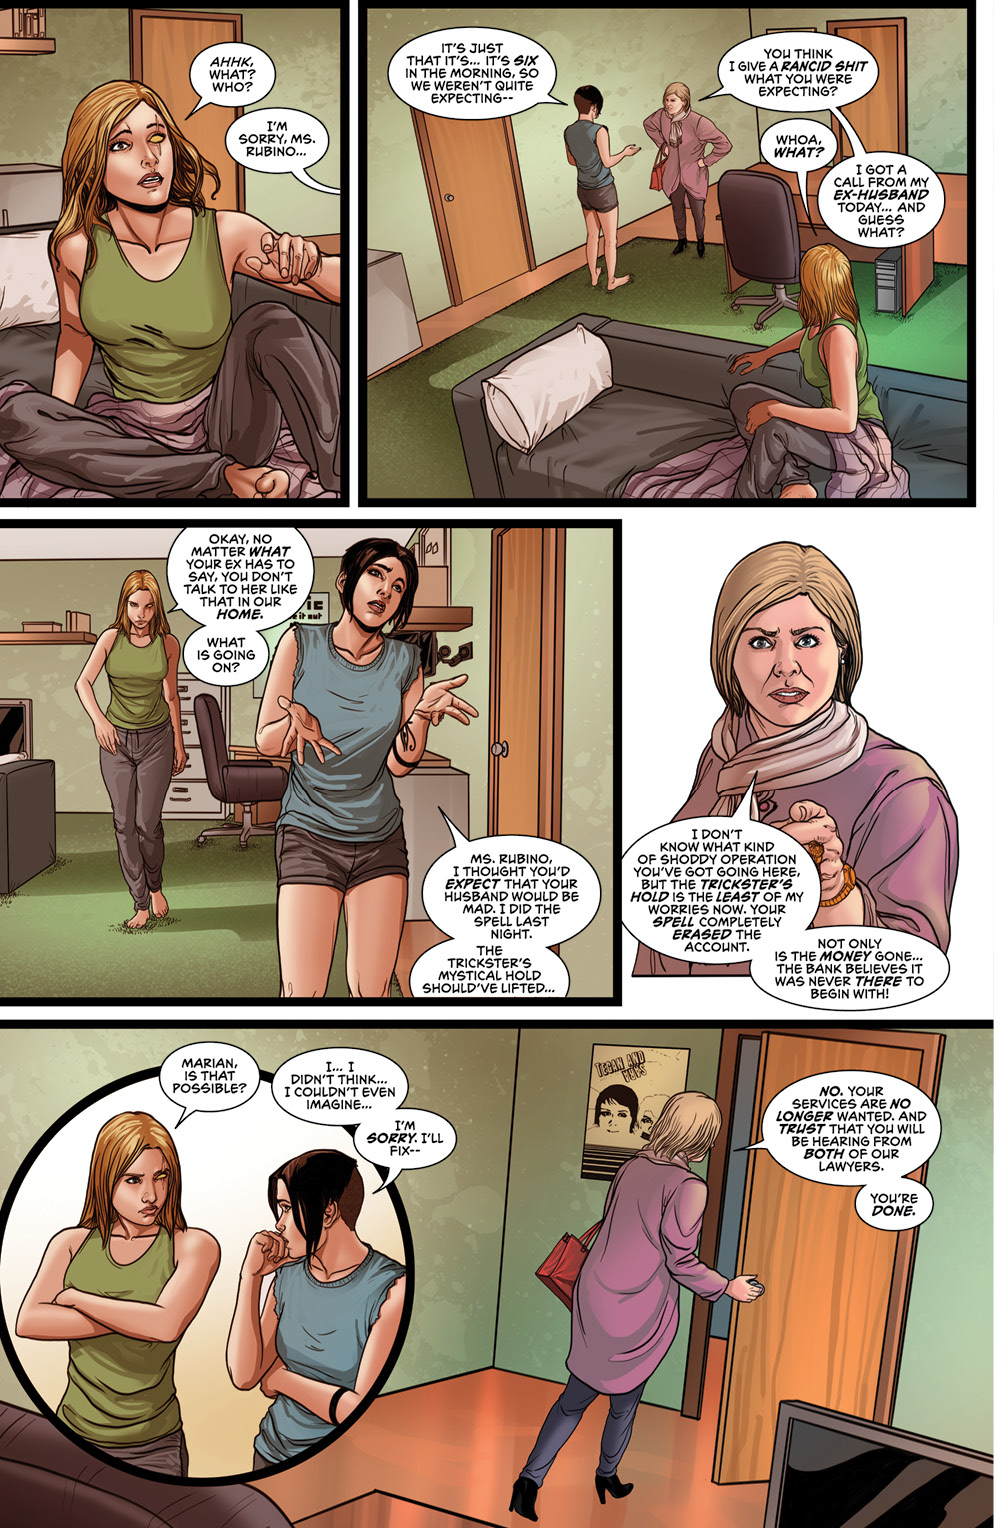 RH_Ongoing_06_page 6